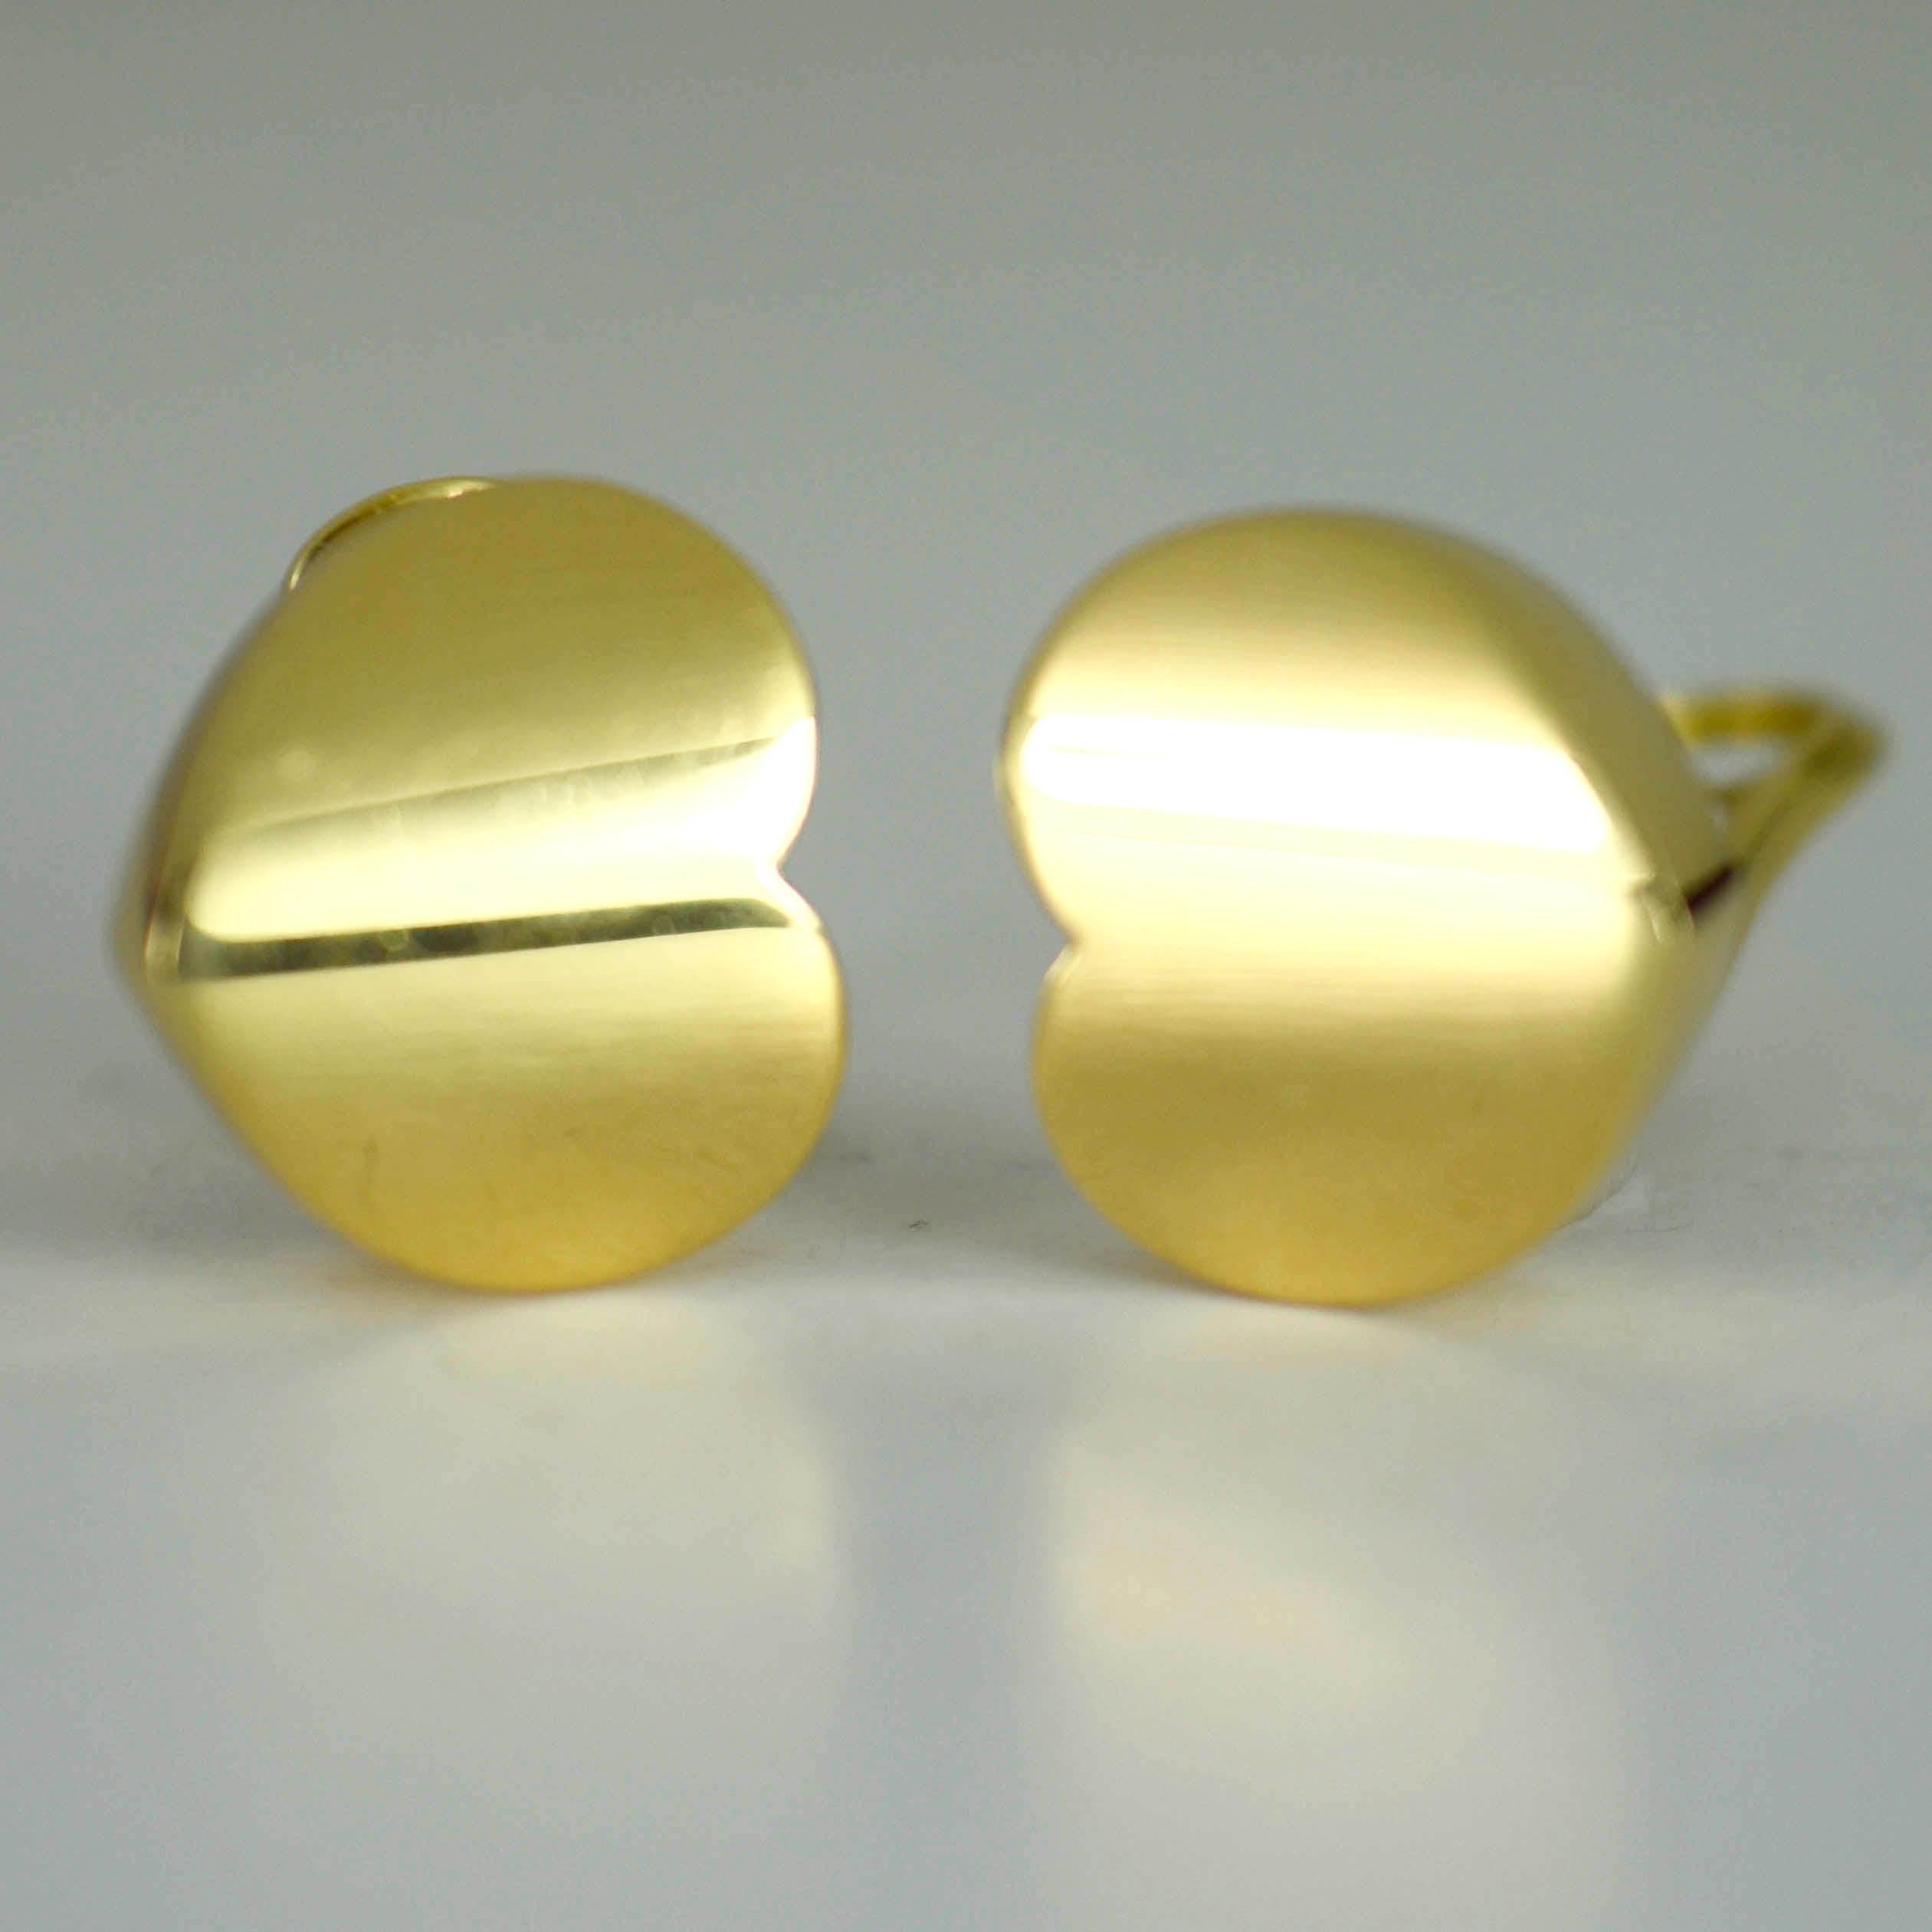 A pair of 18 karat yellow gold ear clips by Marina B designed as a heart worn sideways on each ear. The earrings are signed 'Marina B', marked 'MB', numbered 2239002 and have control marks for 18 karat gold and Italian manufacture.

Height: 1.8cm,